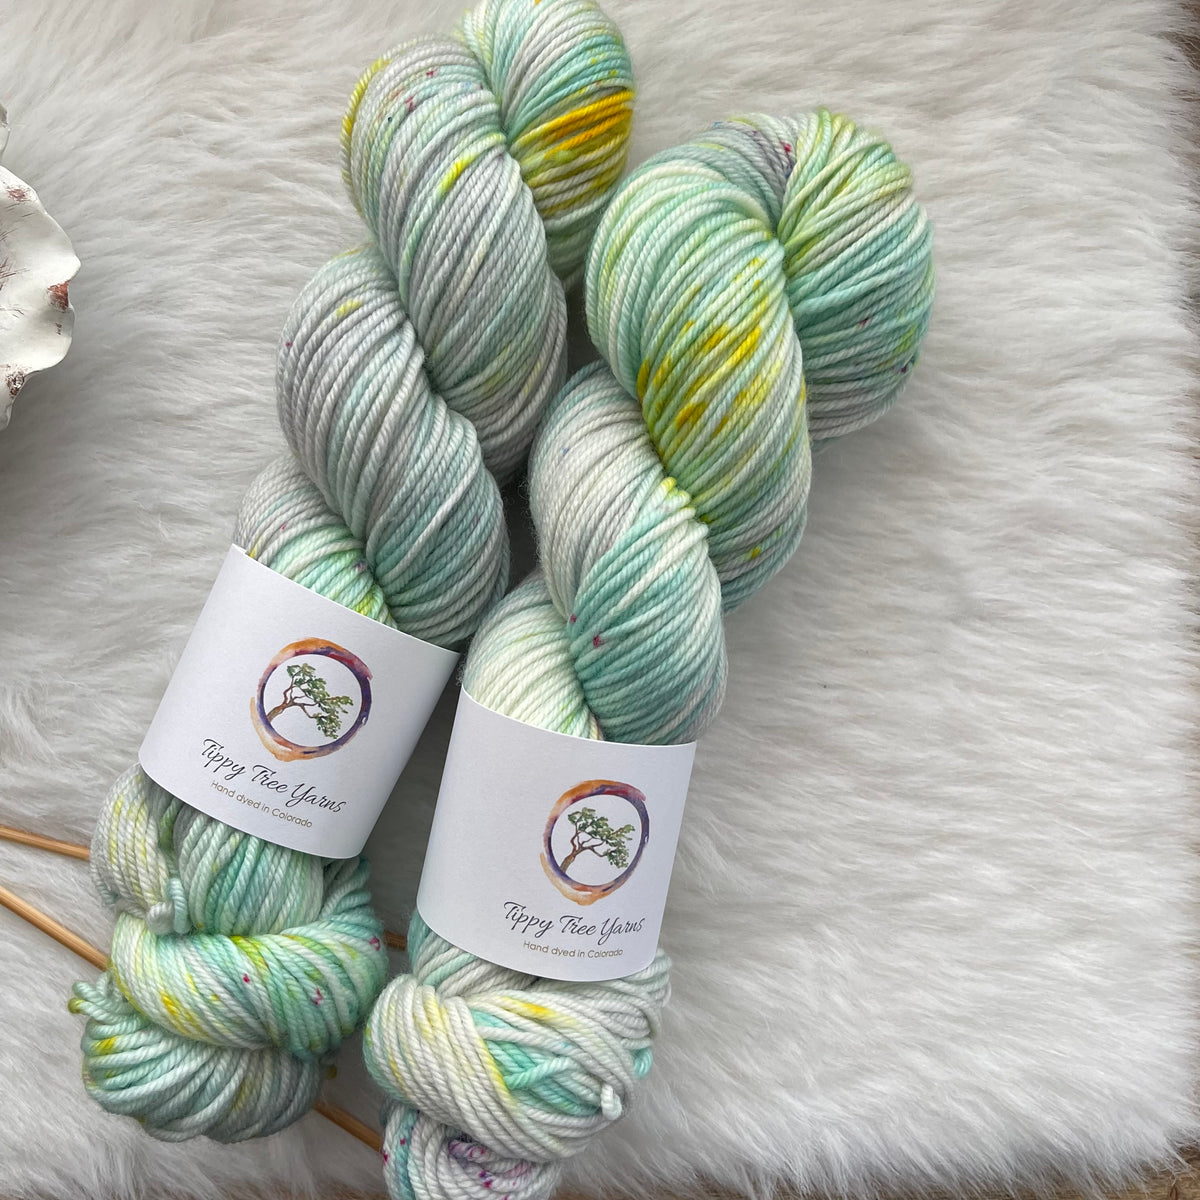 BLOOM FROM WITHIN  -SUPER DK - Ready to Ship- Hand Dyed Yarn Skein